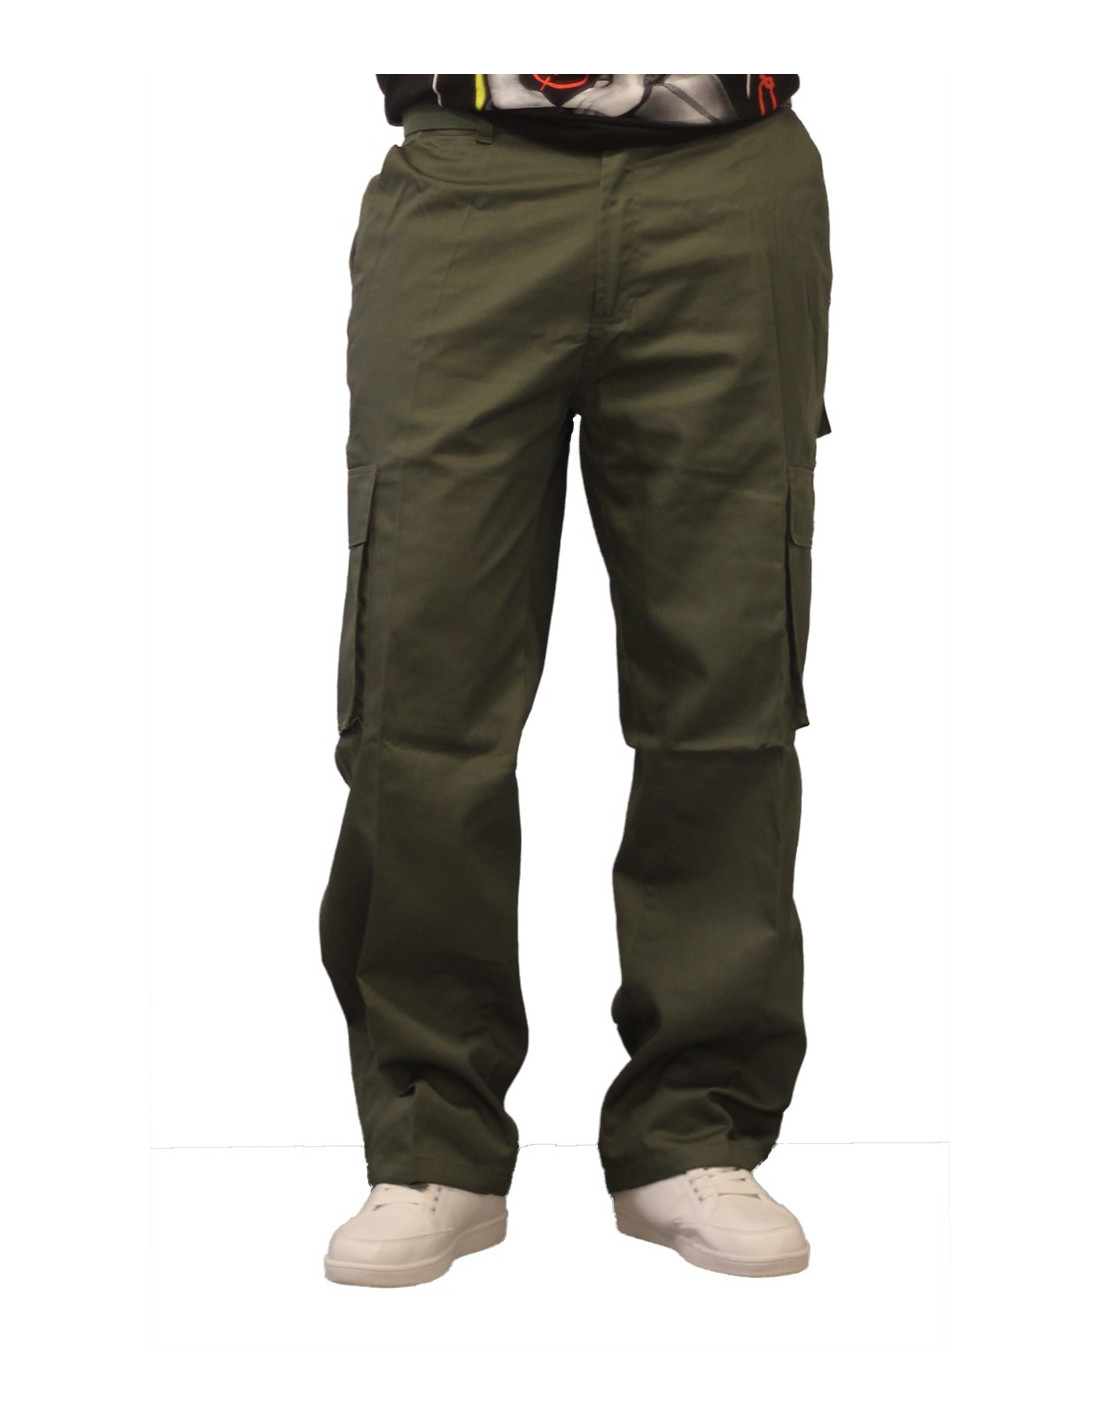 Access Olive Street Cargo Pants